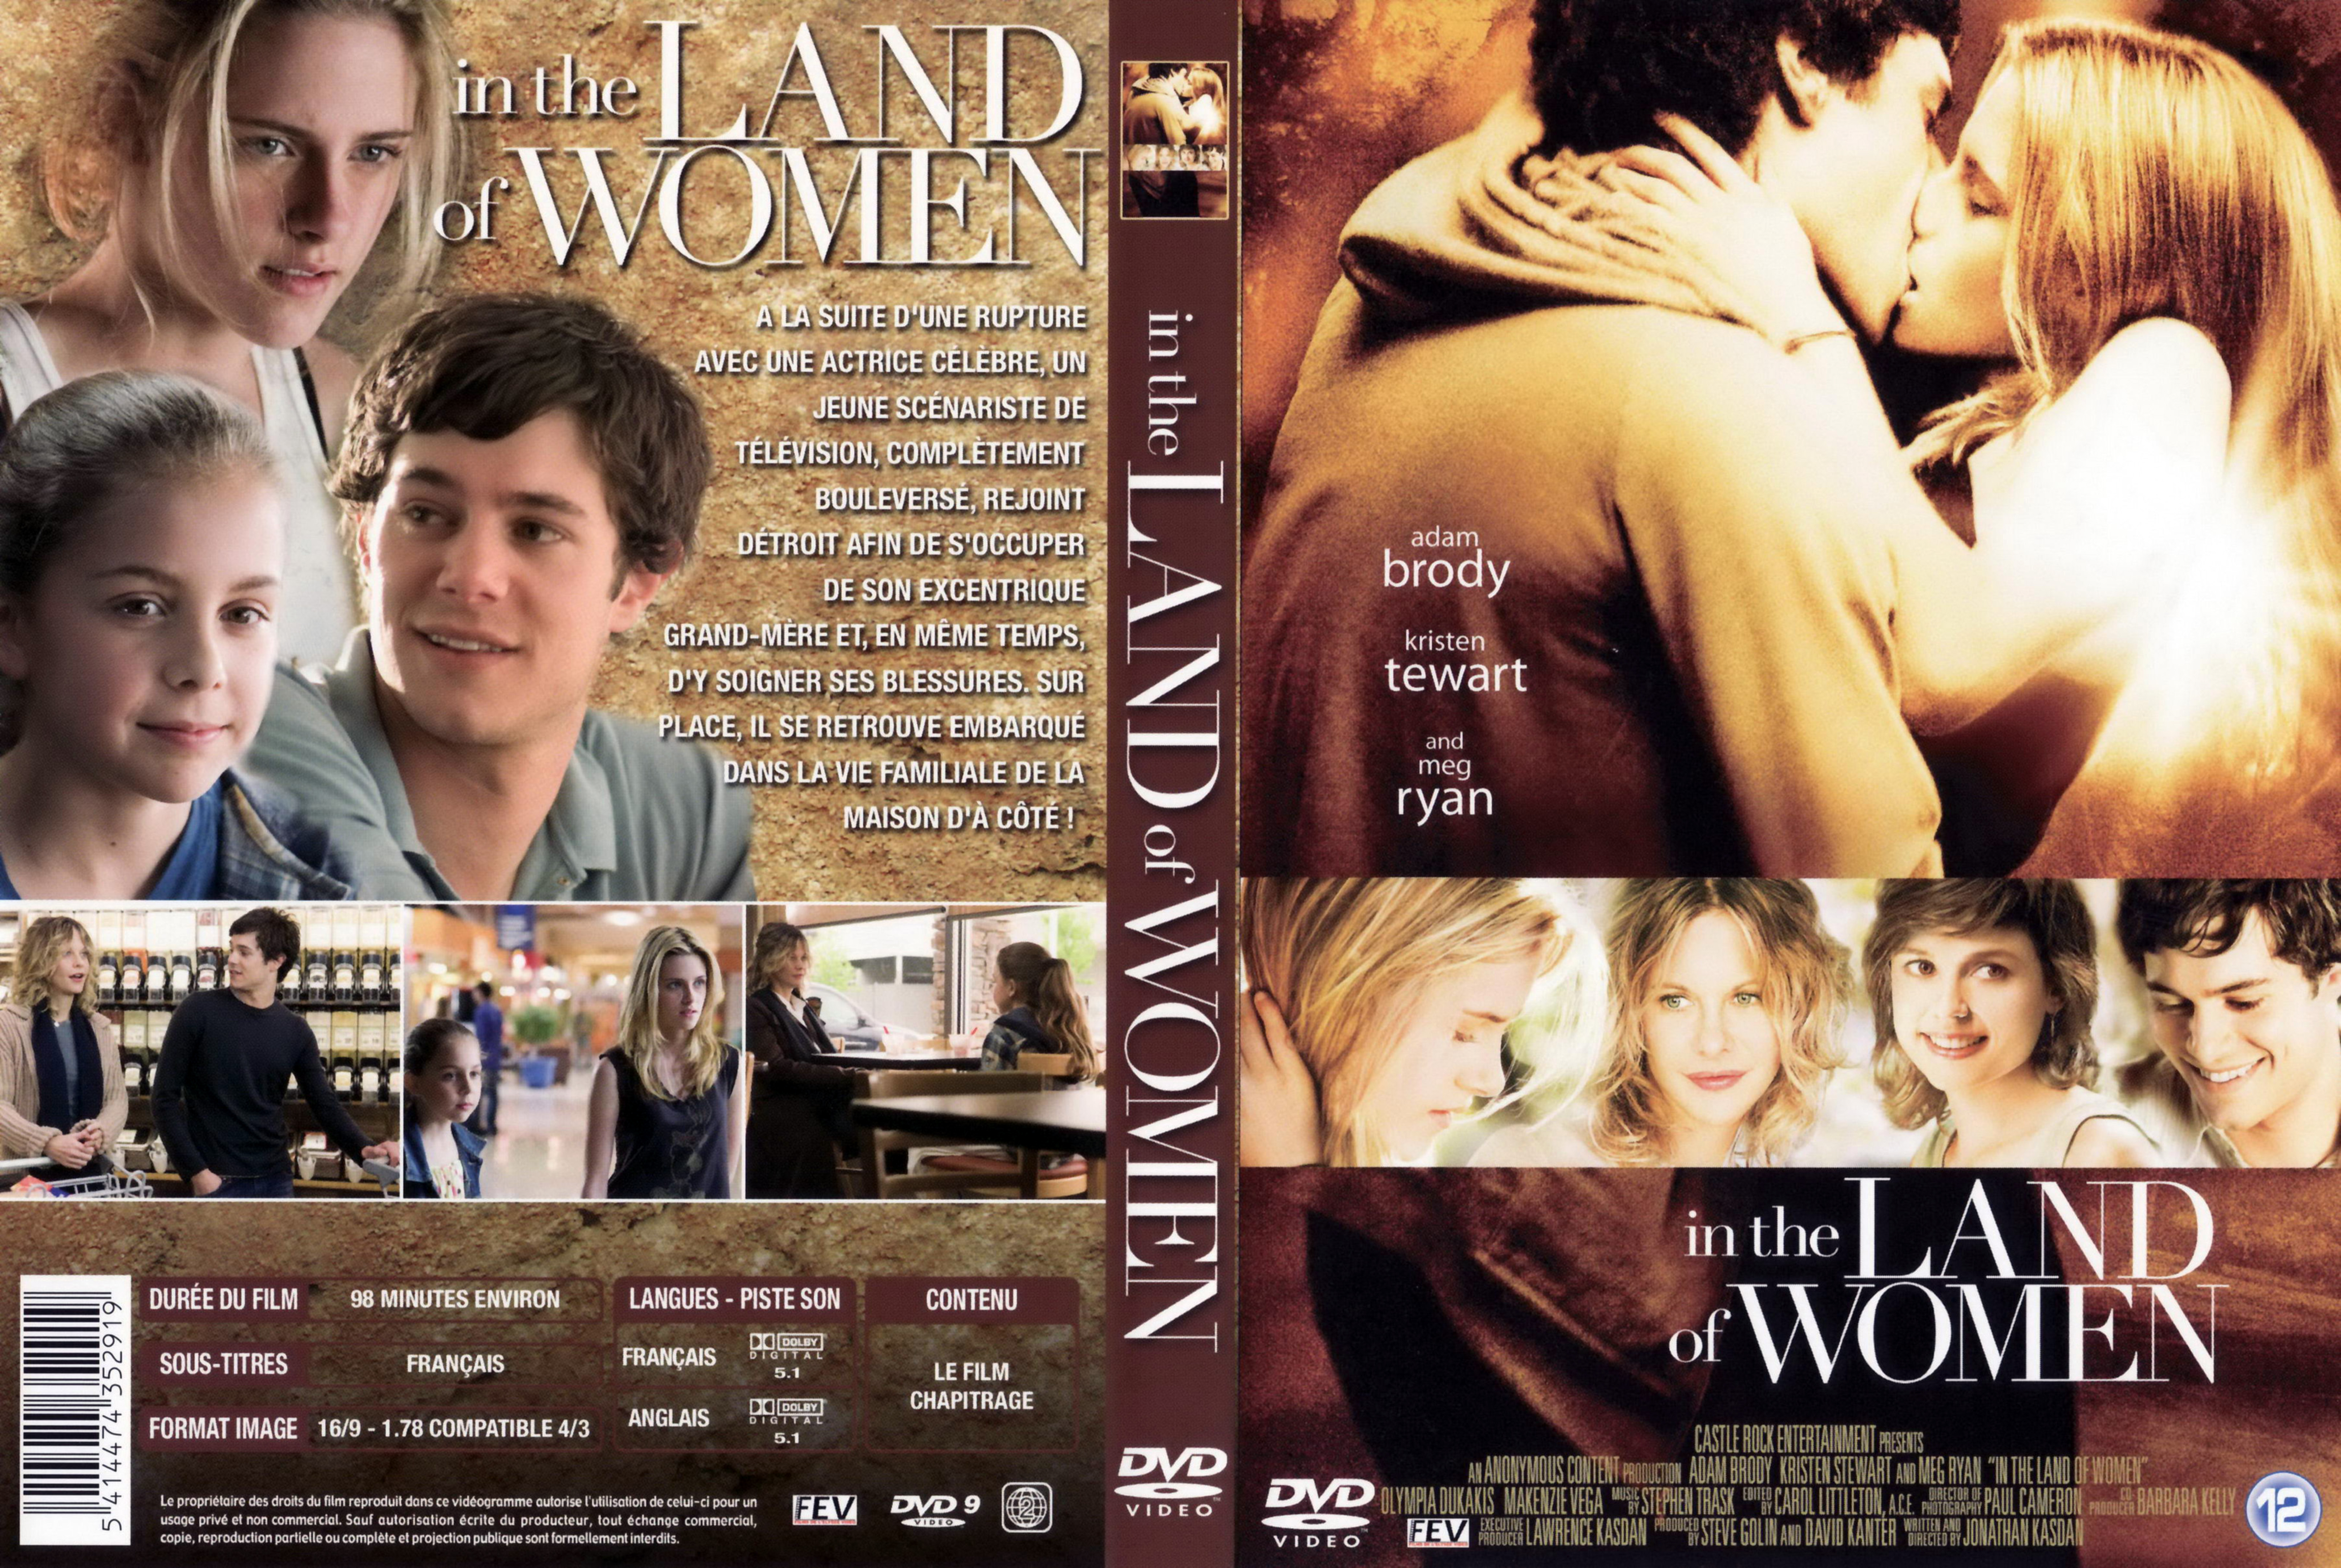 Jaquette DVD In the land of woman